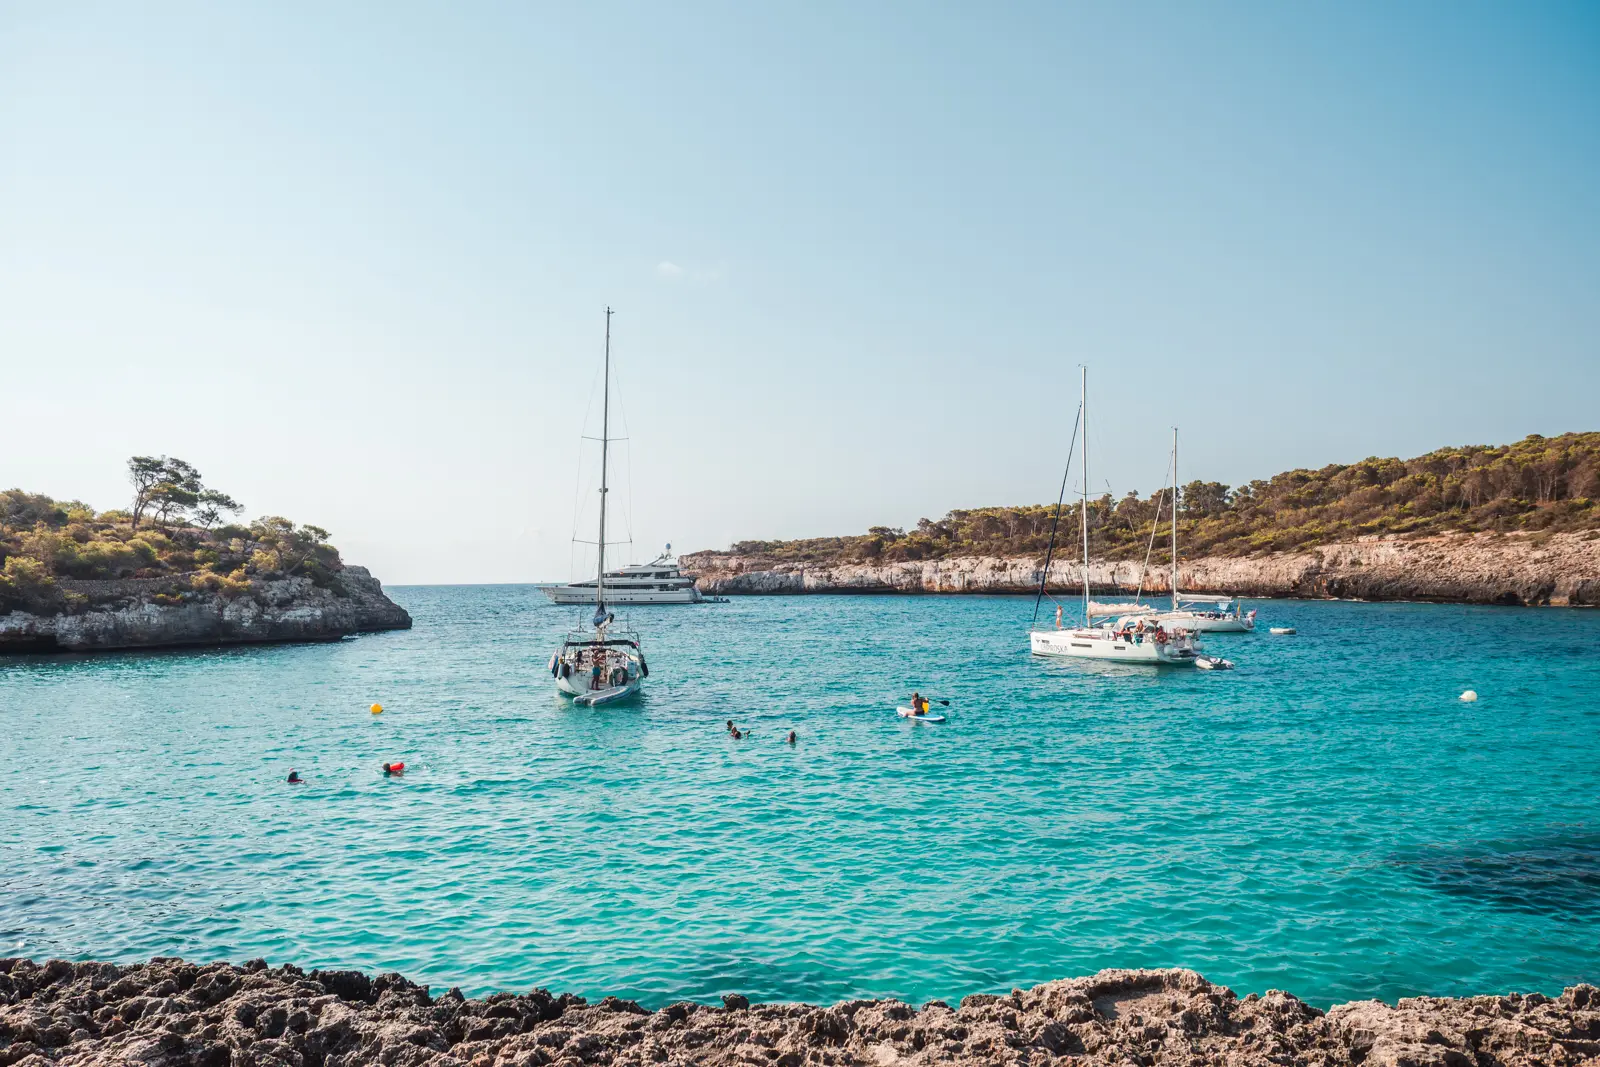 Three white sailboats and a yacht with people swimming around in the turquoise ocean of Cala Mondrago Mallorca.